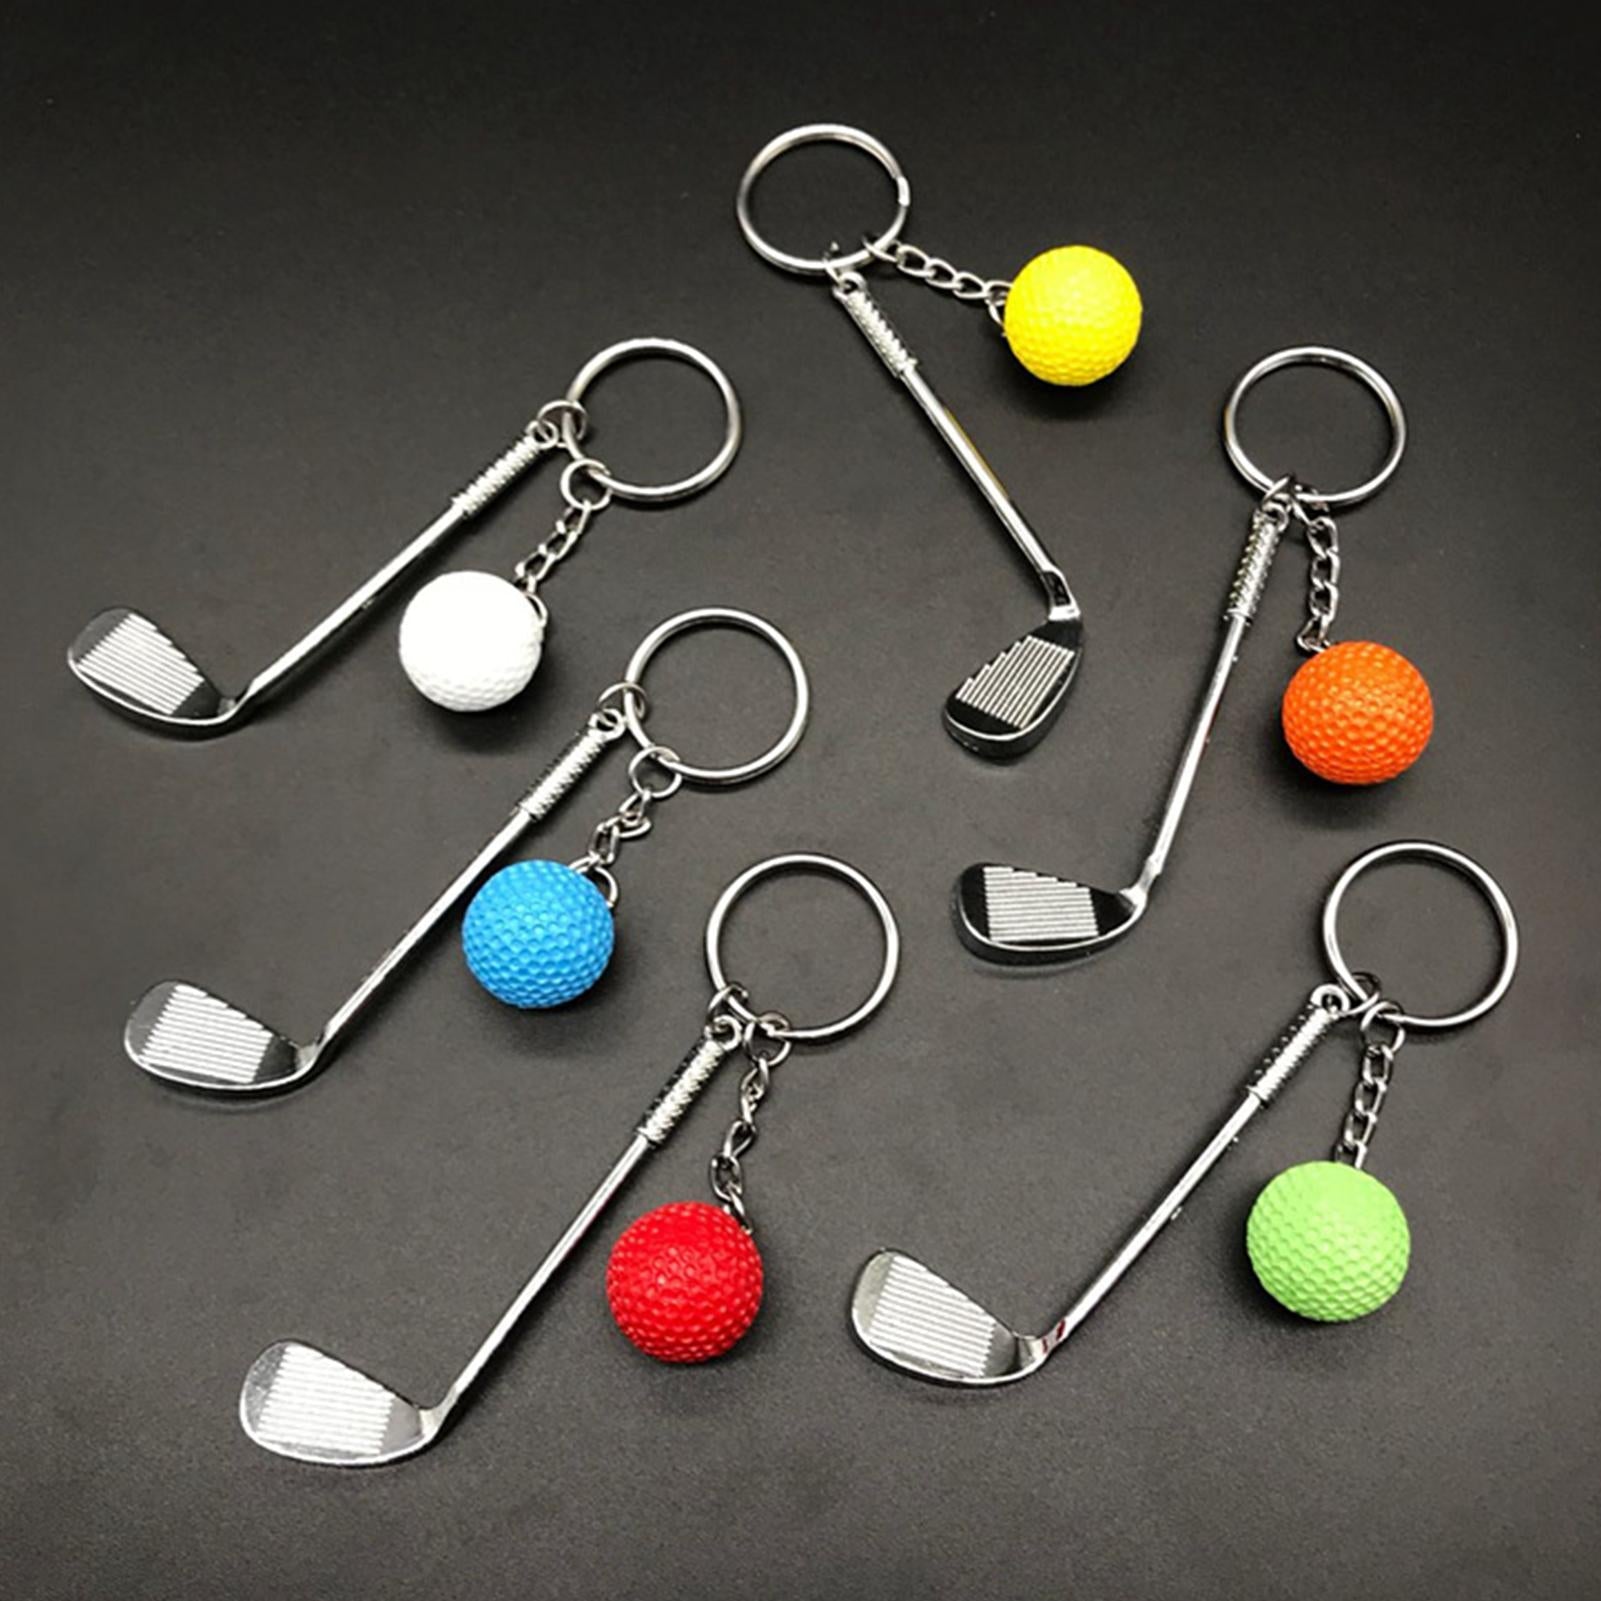 10Pcs Mini Golf Club Ball Pendants Keychains Keyrings Sporting Goods Sports Gift For Fans Souvenirs Ornaments Golf Supplies